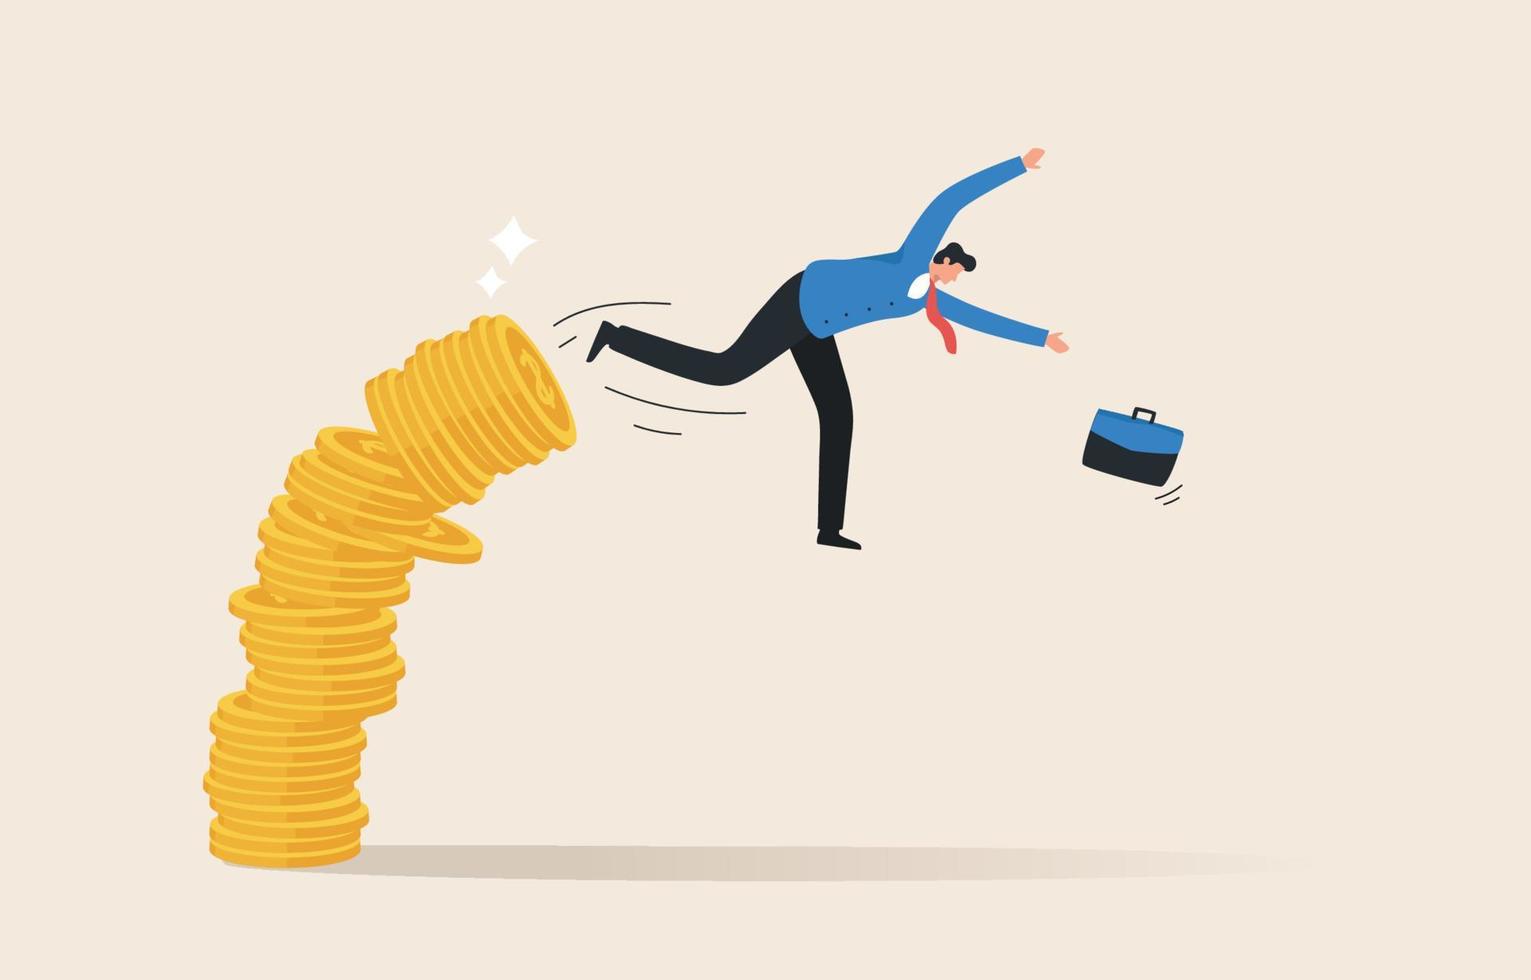 Bankruptcy, Money loss, Debt increase, Lack of finance, investment fund risk, wealth devaluation, income decrease. Businessman falls from a stack of coins. vector